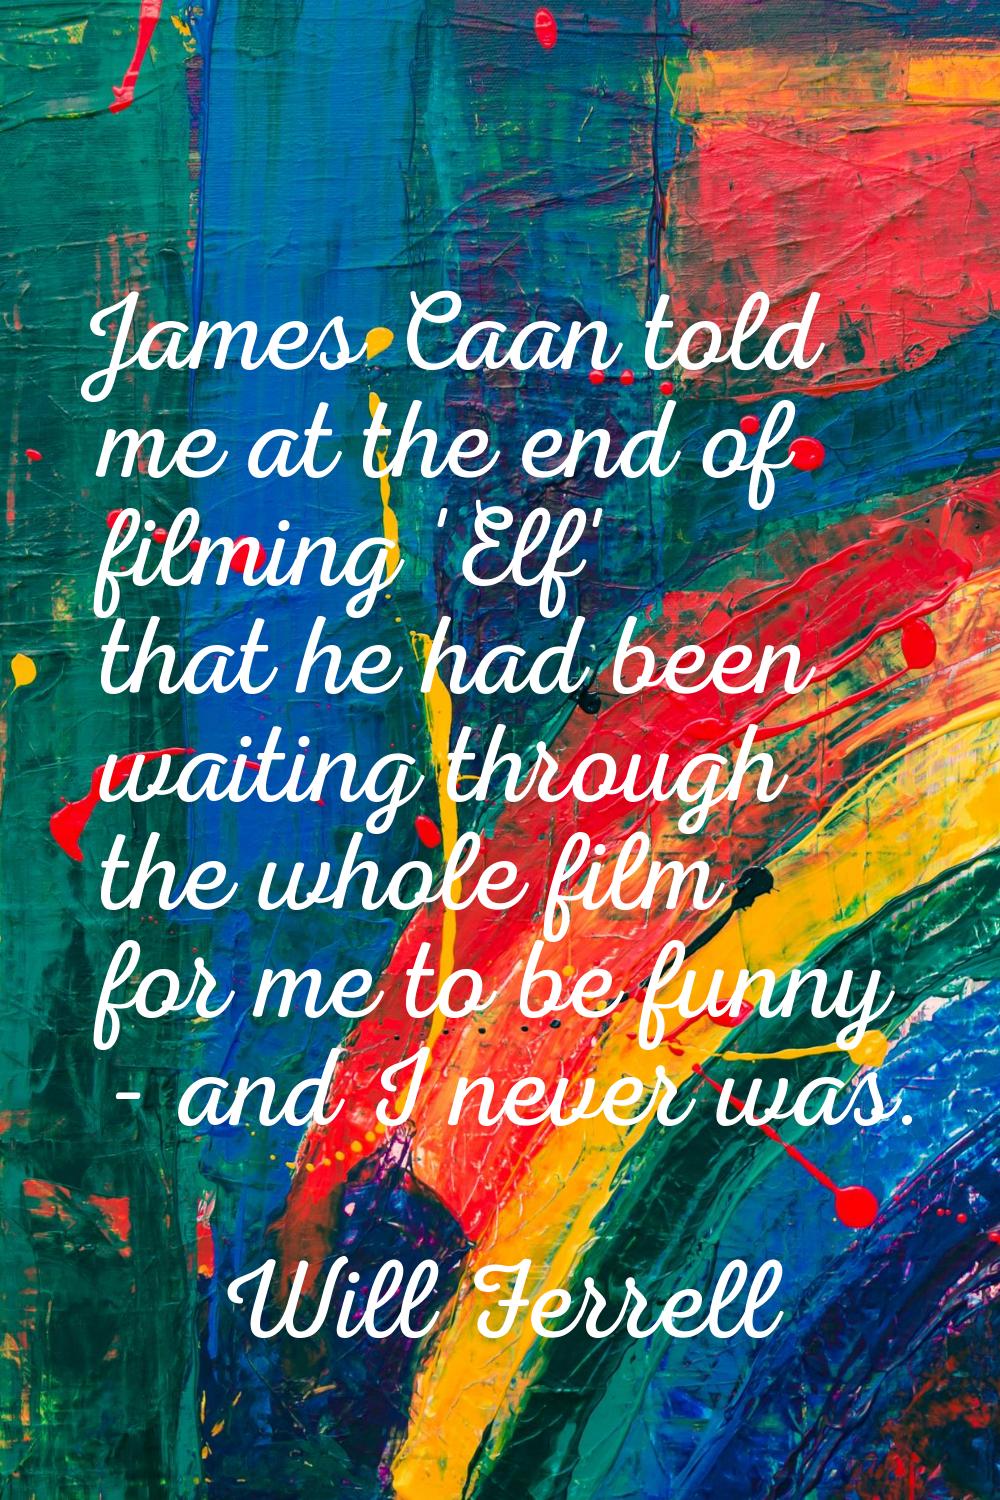 James Caan told me at the end of filming 'Elf' that he had been waiting through the whole film for 